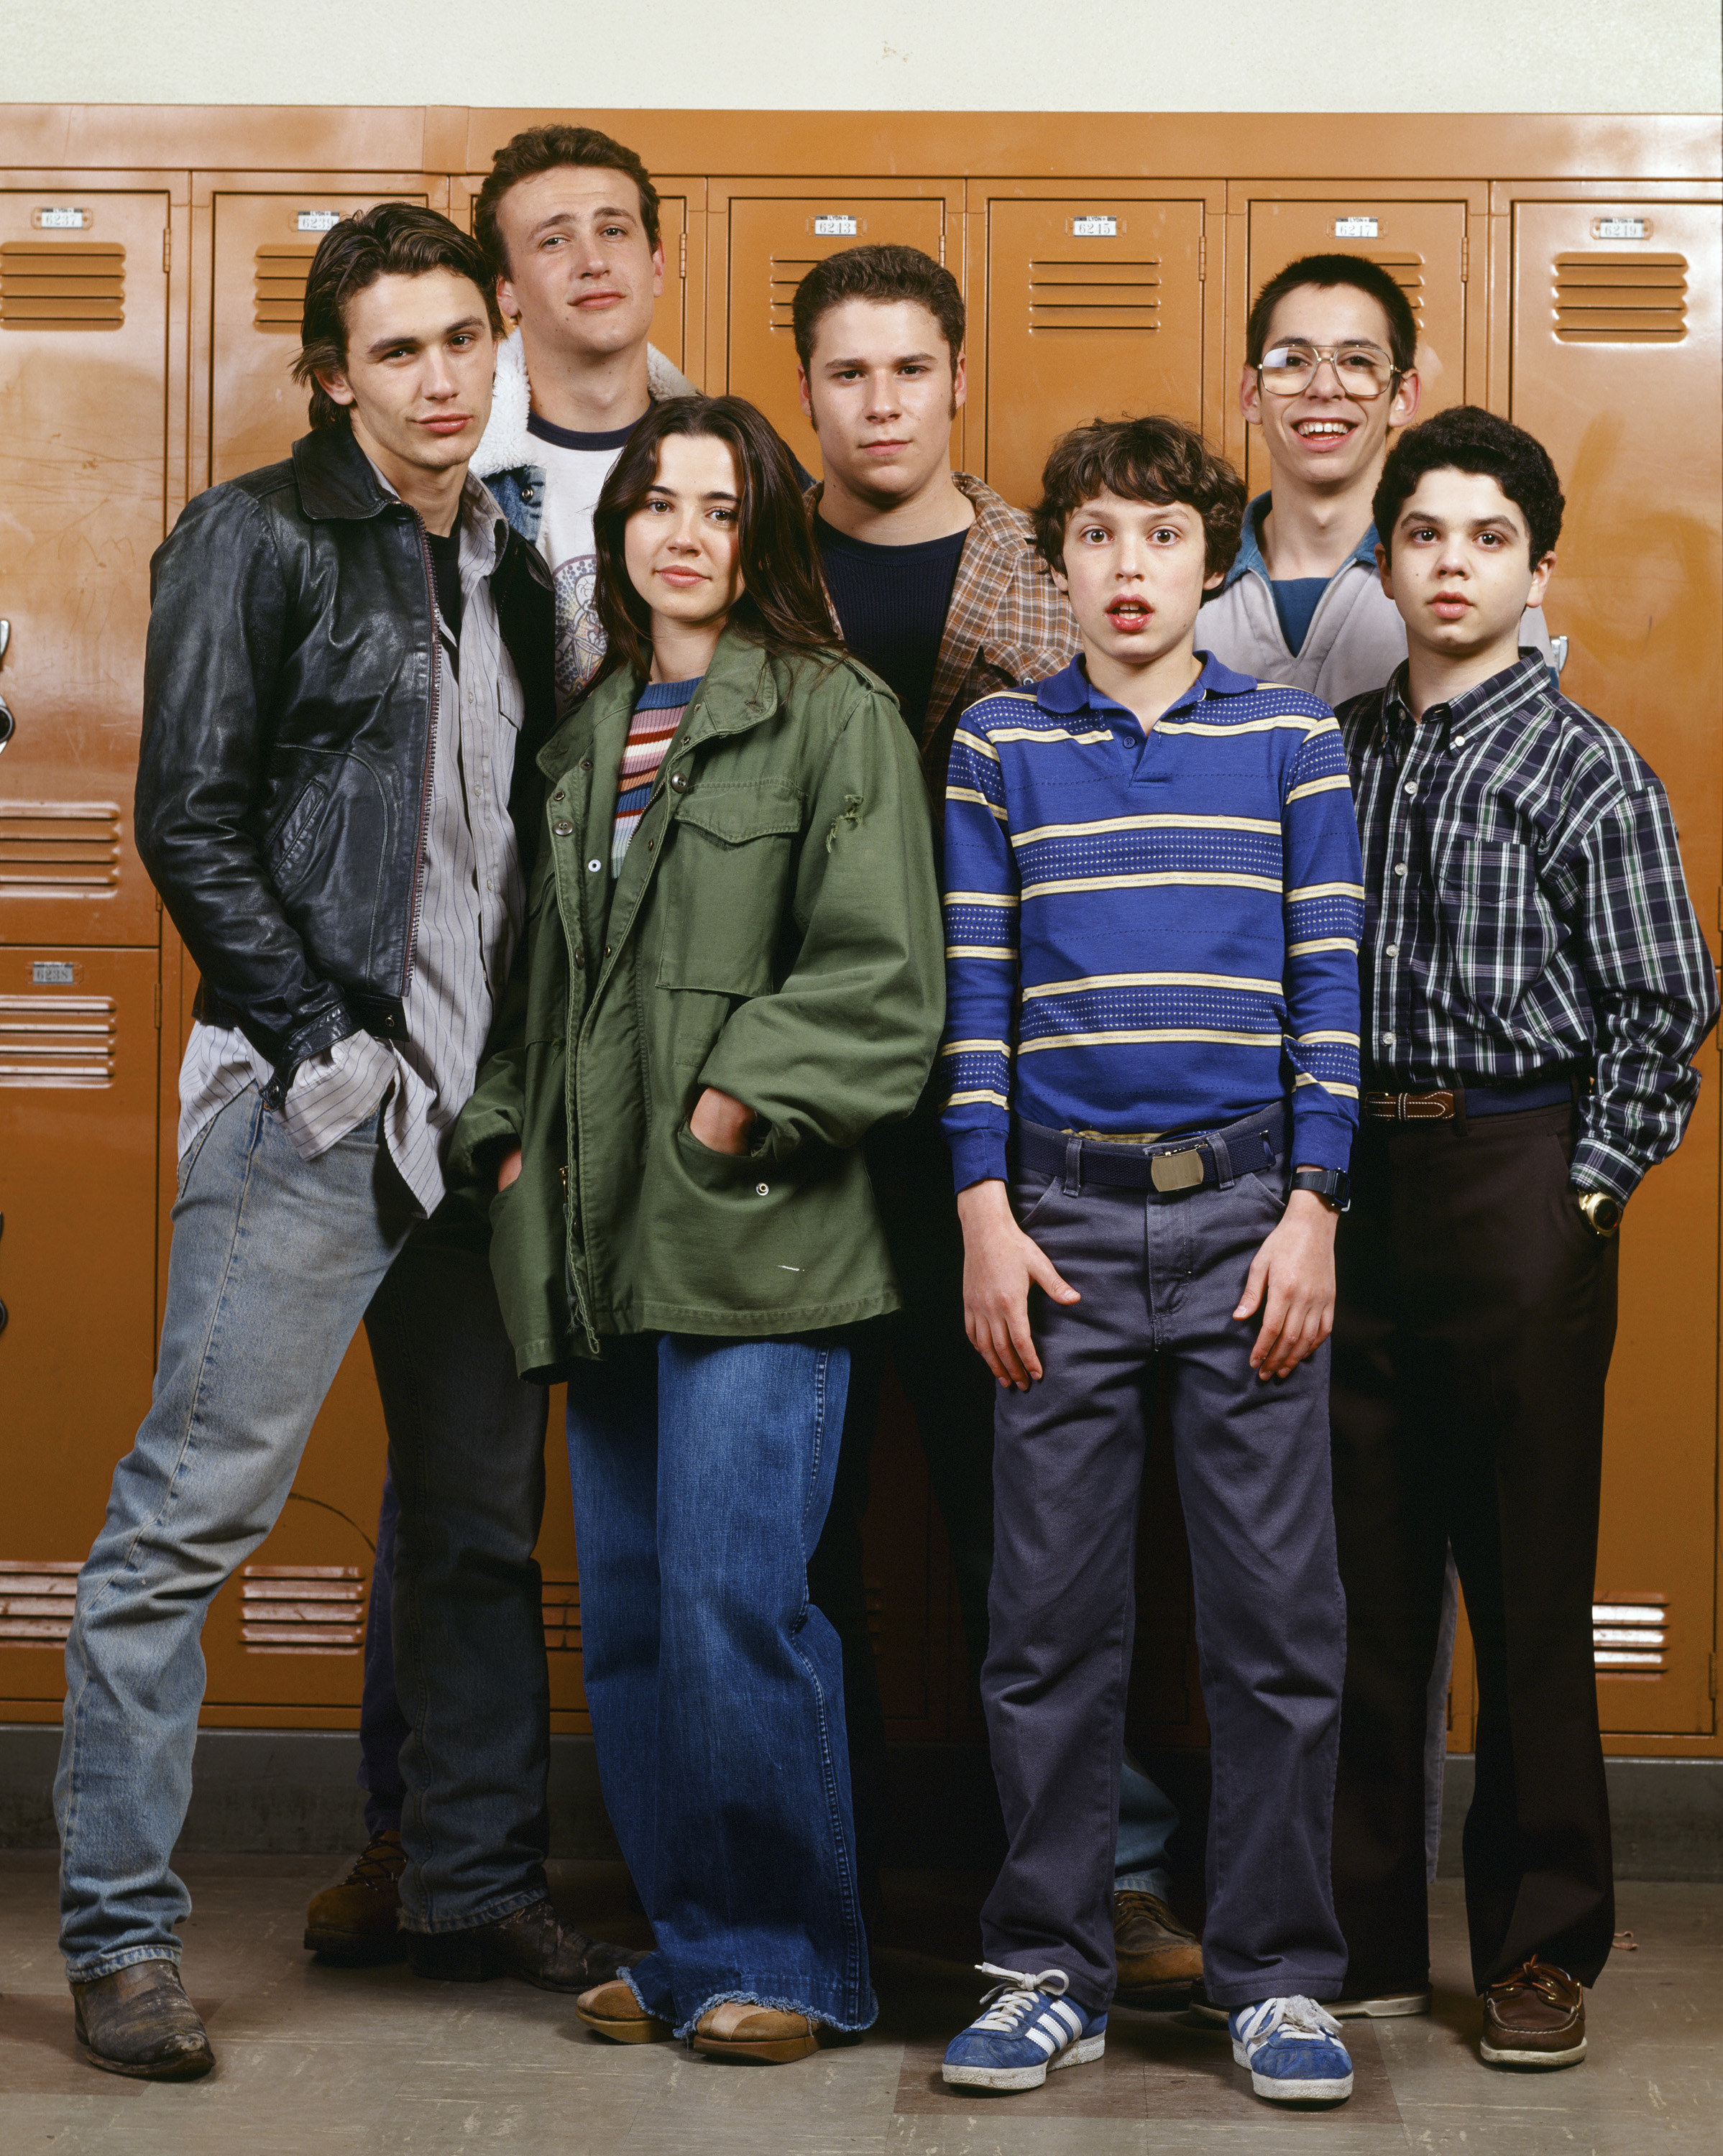 Linda poses in front of school lockers with the rest of the main cast of Freaks and Geeks for a promo photo